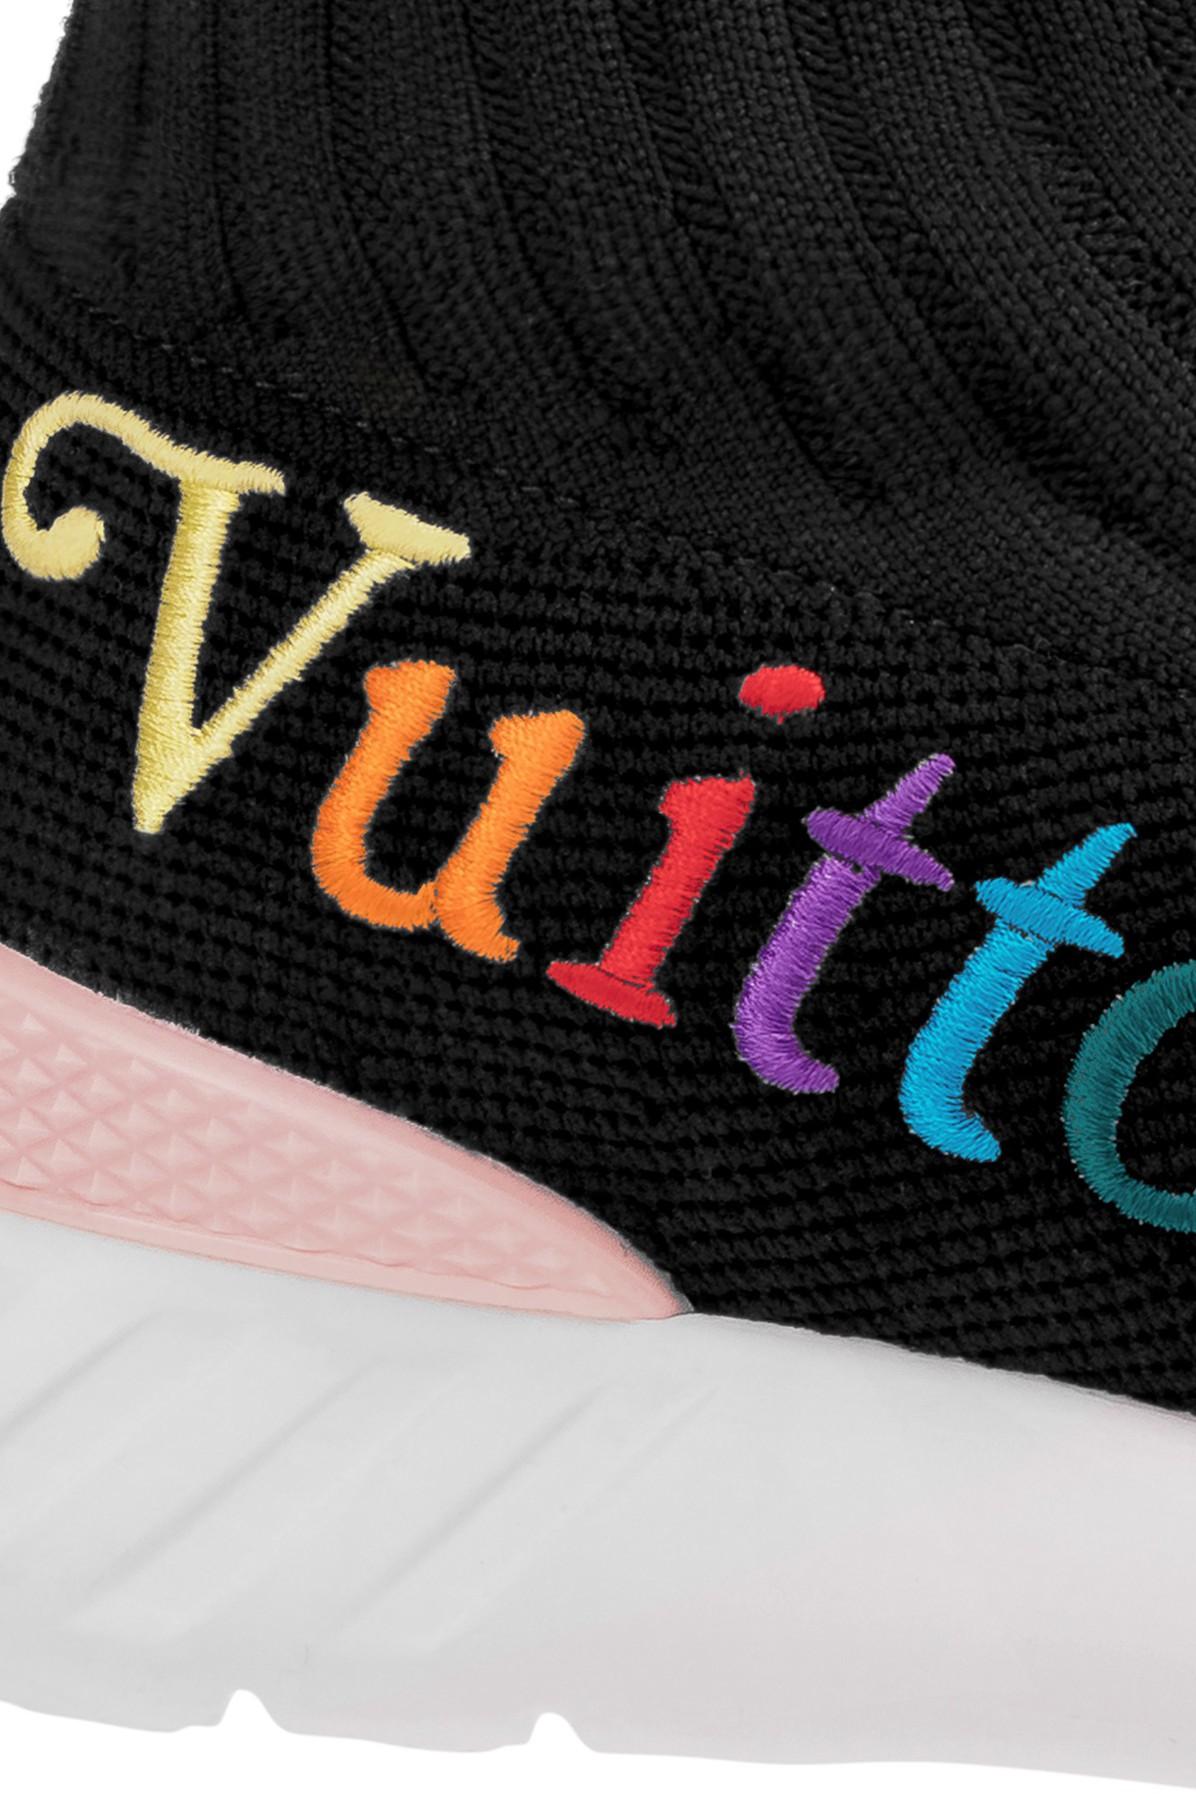 Louis Vuitton Aftergame Sneakers - ShopStyle